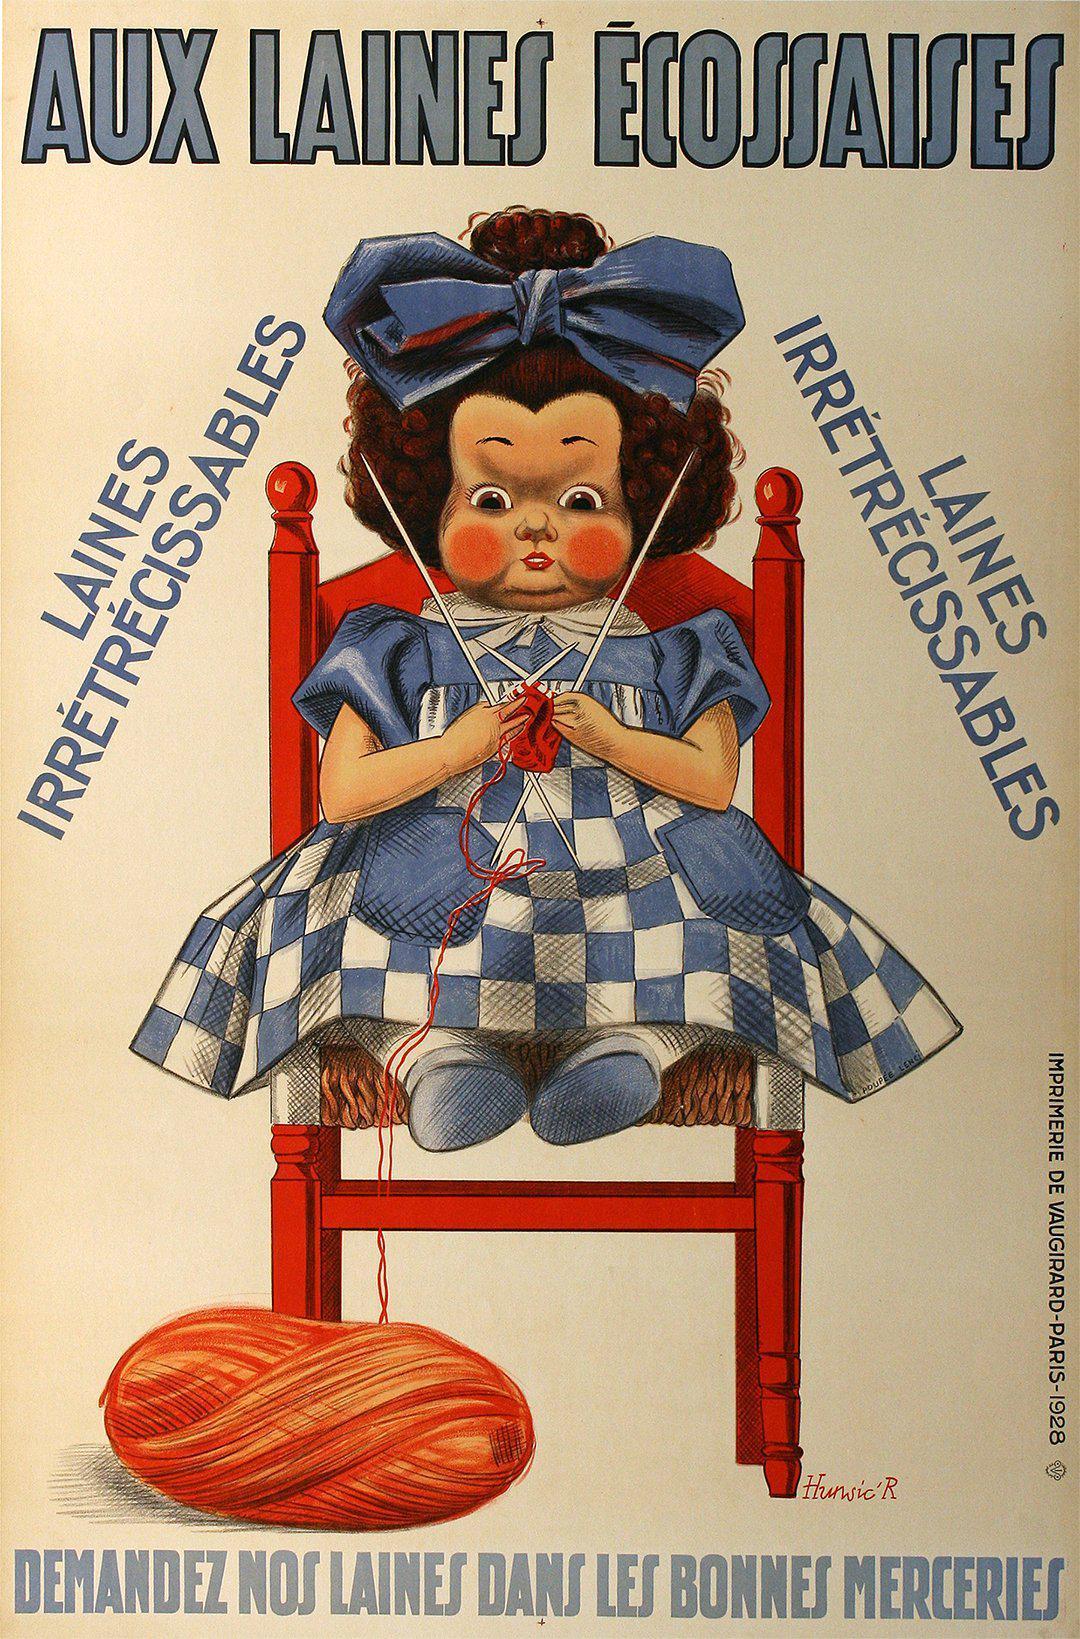 Original Vintage French Poster Aux Laines Ecossaises 1928 by Hurwin - Little Girl Knitting Yarn Shop